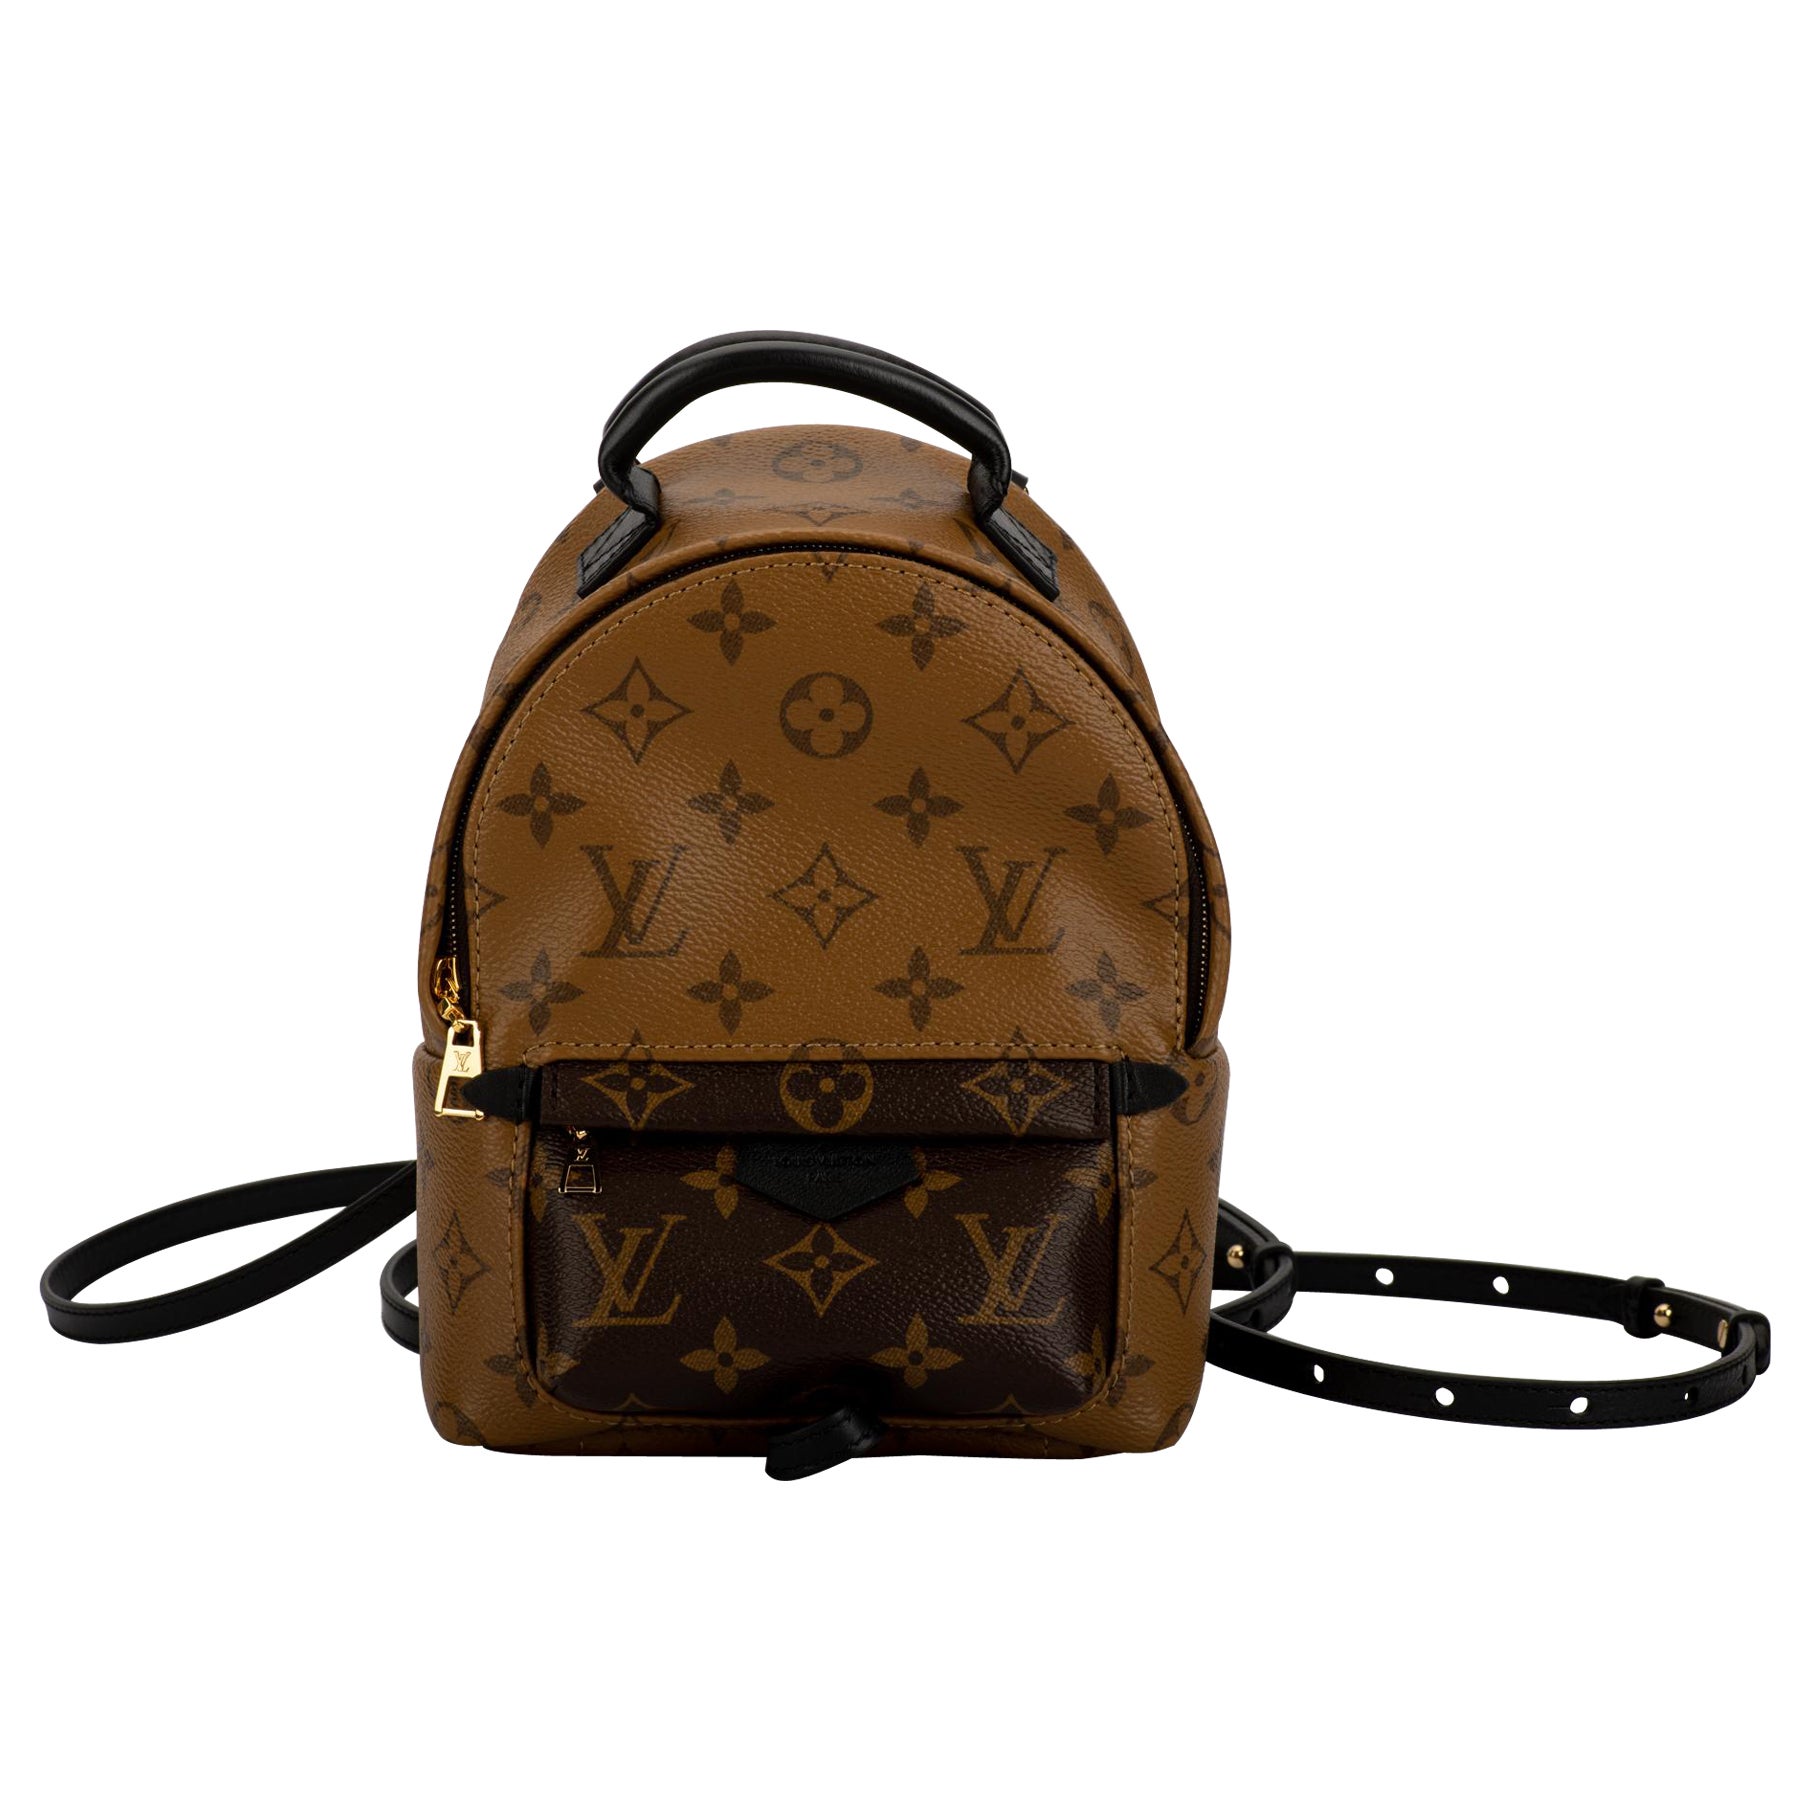 Body Louis Vuitton - 235 For Sale on 1stDibs